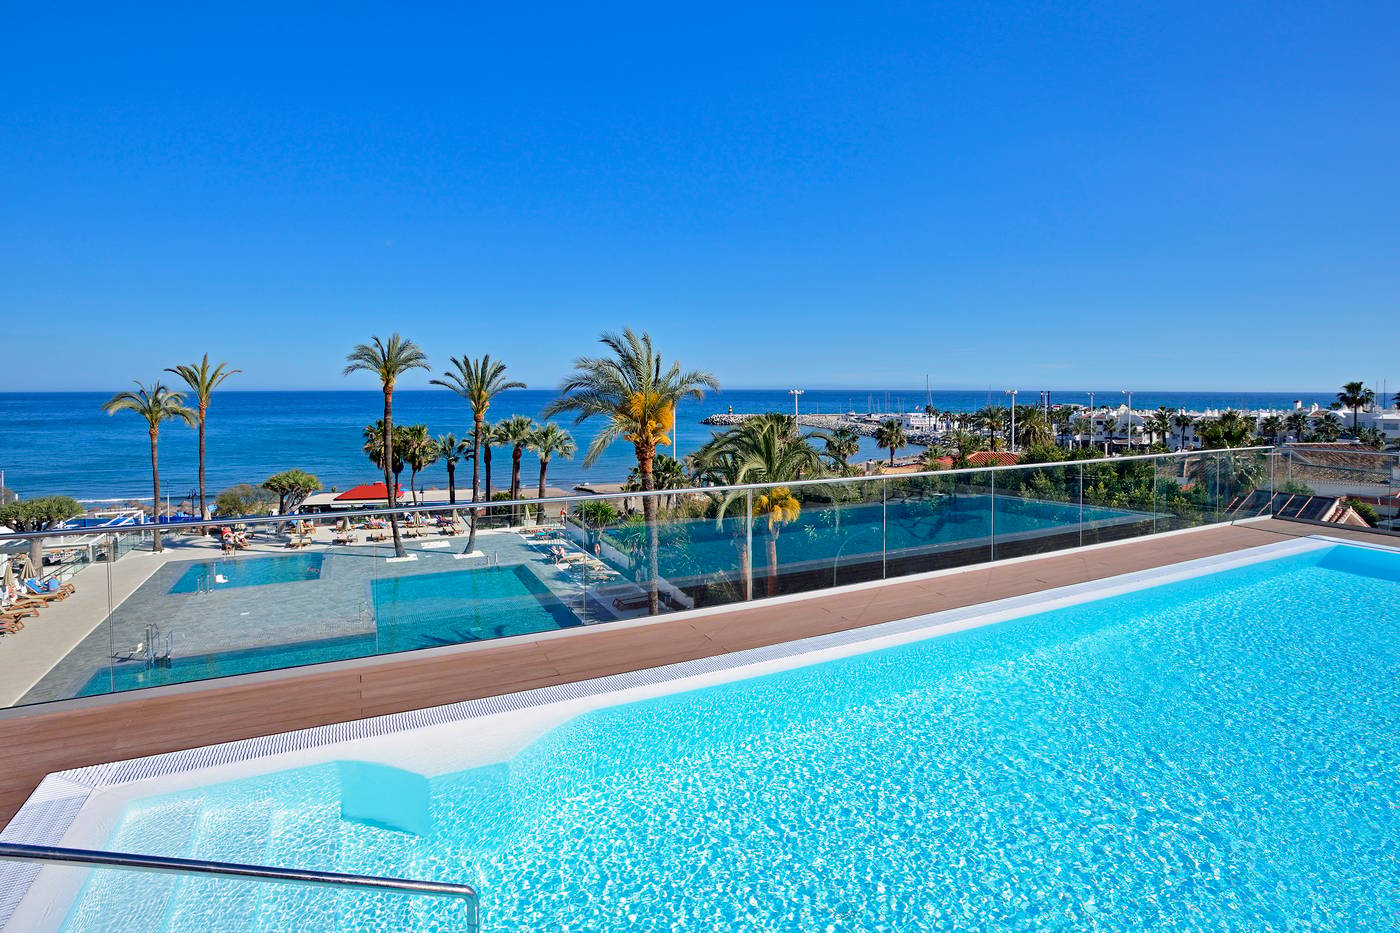 Hotel Ocean House Costa del Sol Affiliated by Melia